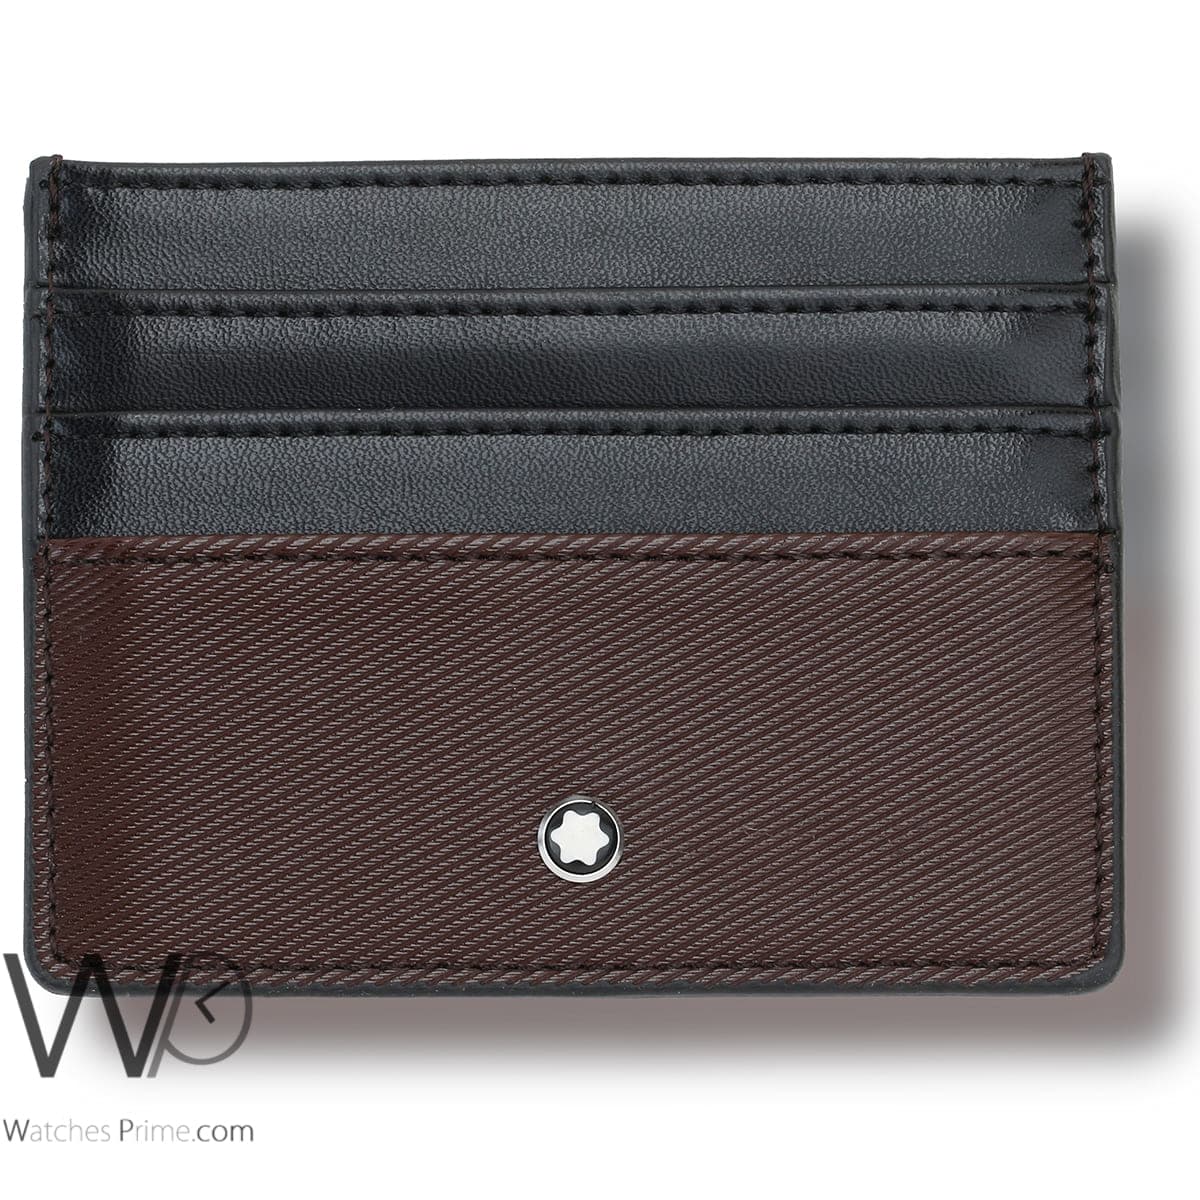 brown-leather-montblanc-card-holder